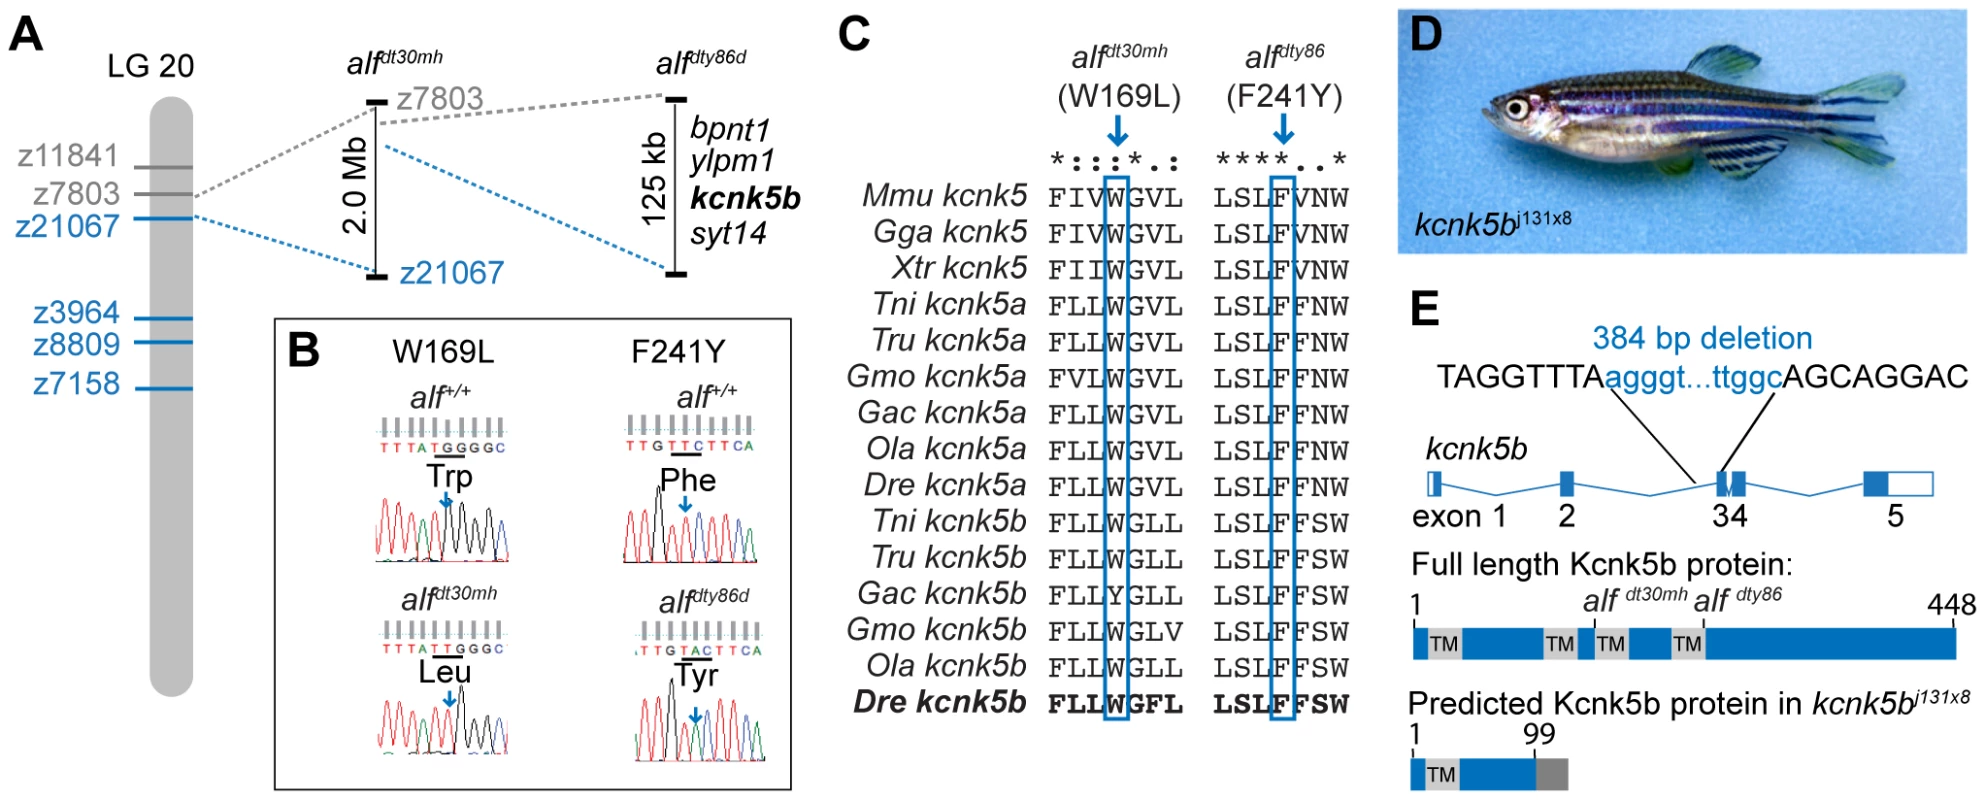 The <i>alf</i> phenotype is due to gain-of-function mutations within the K<sup>+</sup> channel <i>kcnk5b</i>.